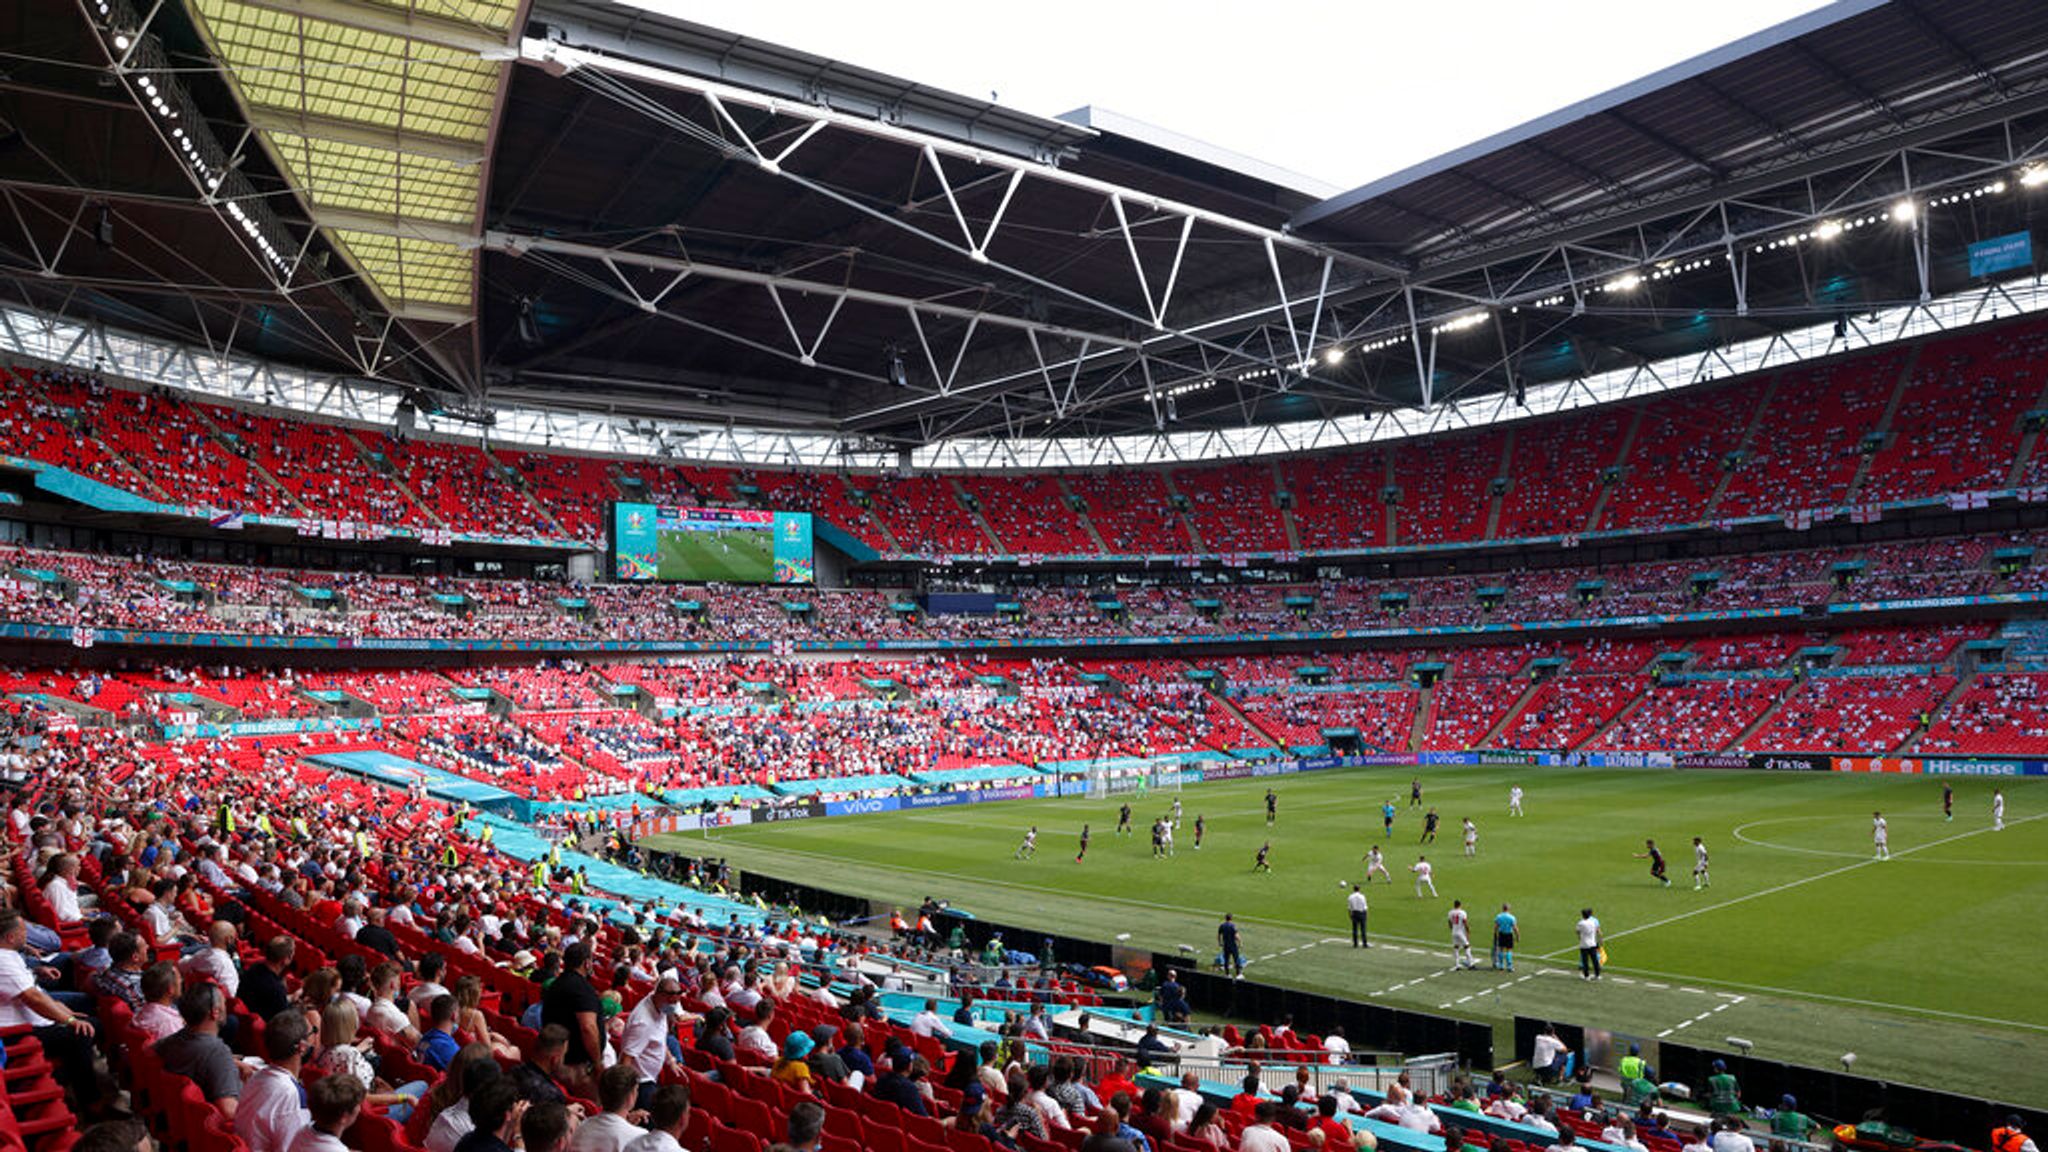 Euro 2020: More than 60,000 fans allowed in Wembley for semi-finals and final | UK News | Sky News